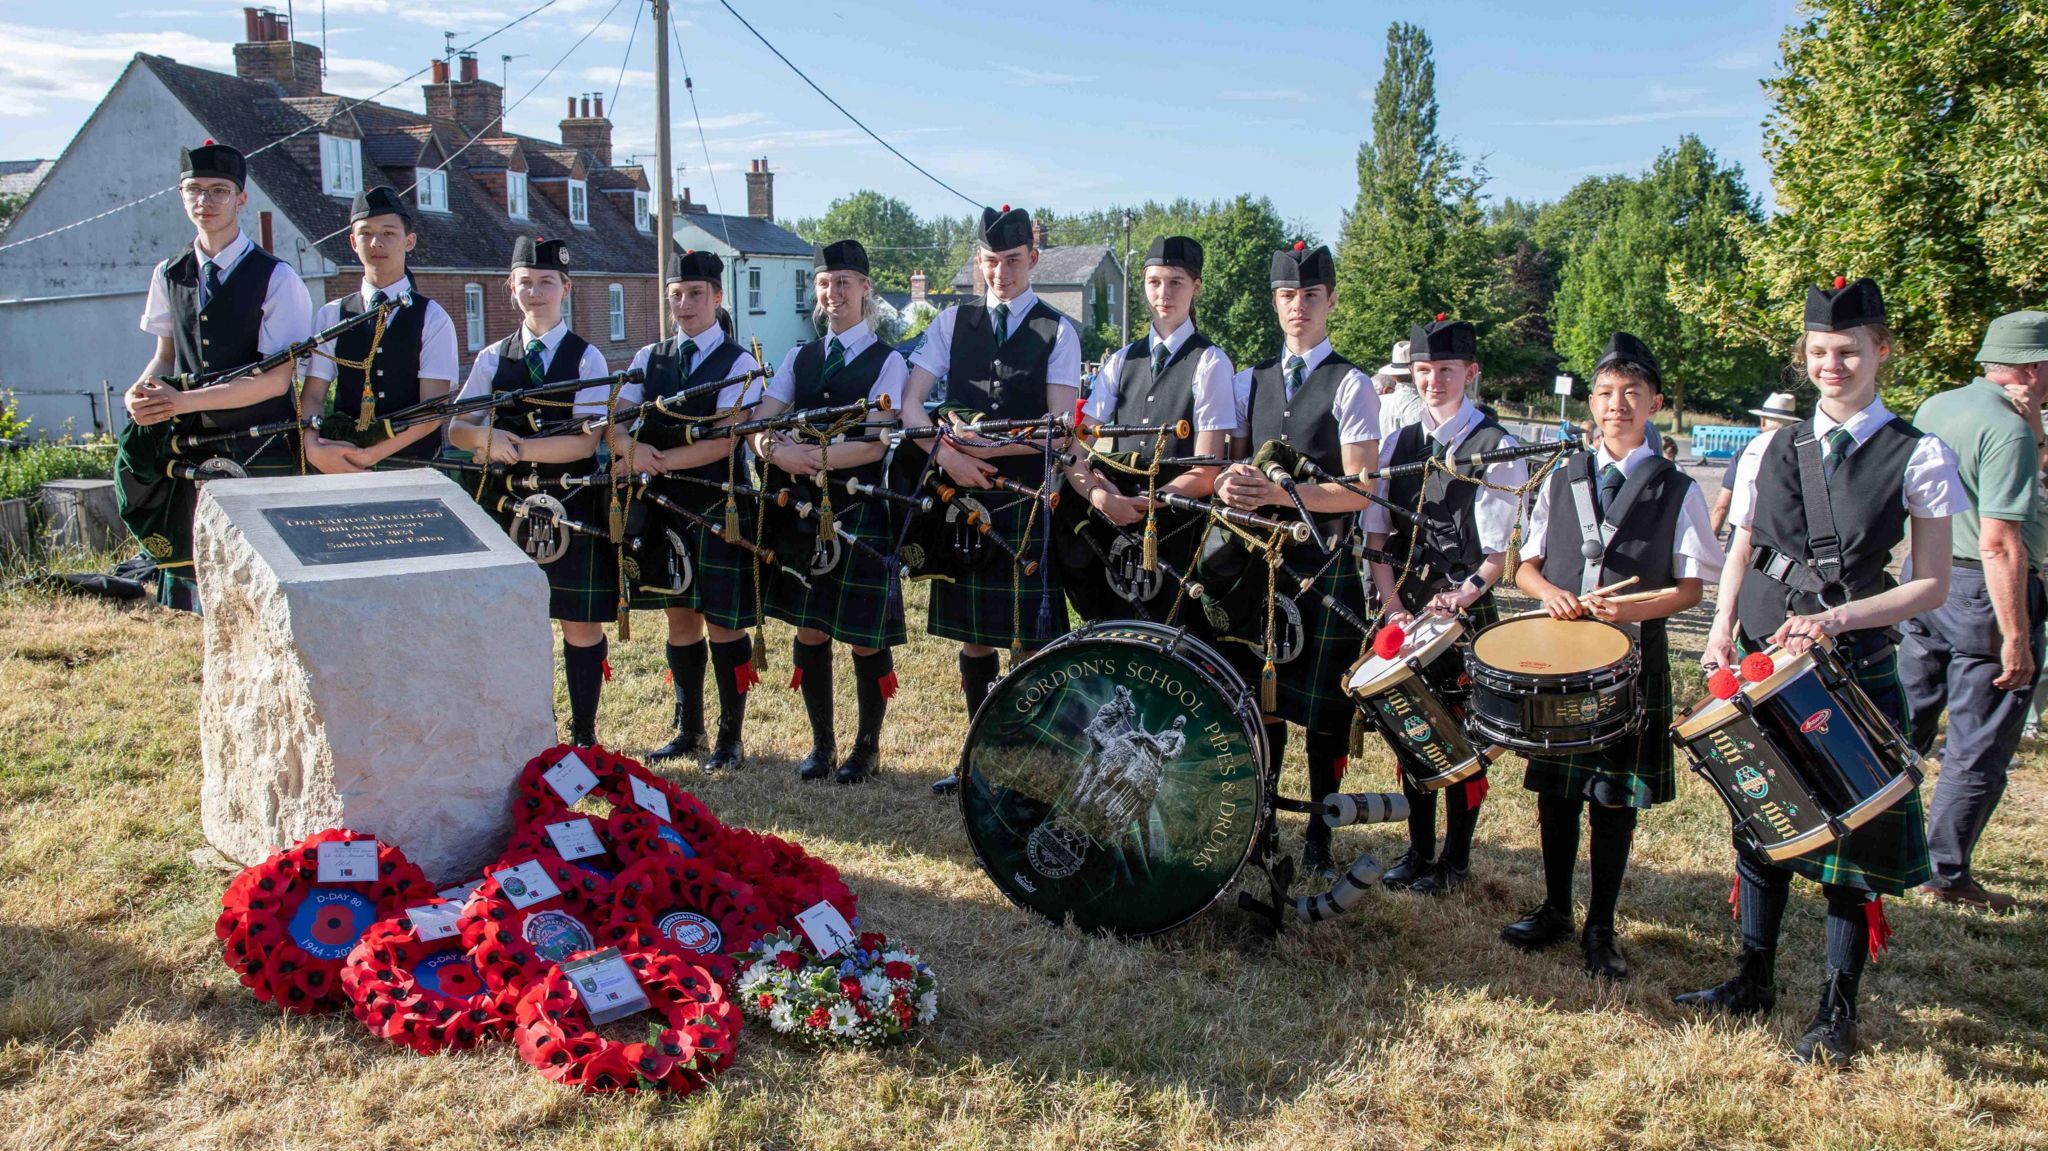 A commemorative stone, surrounded by poppy wreath and pipe and drums band